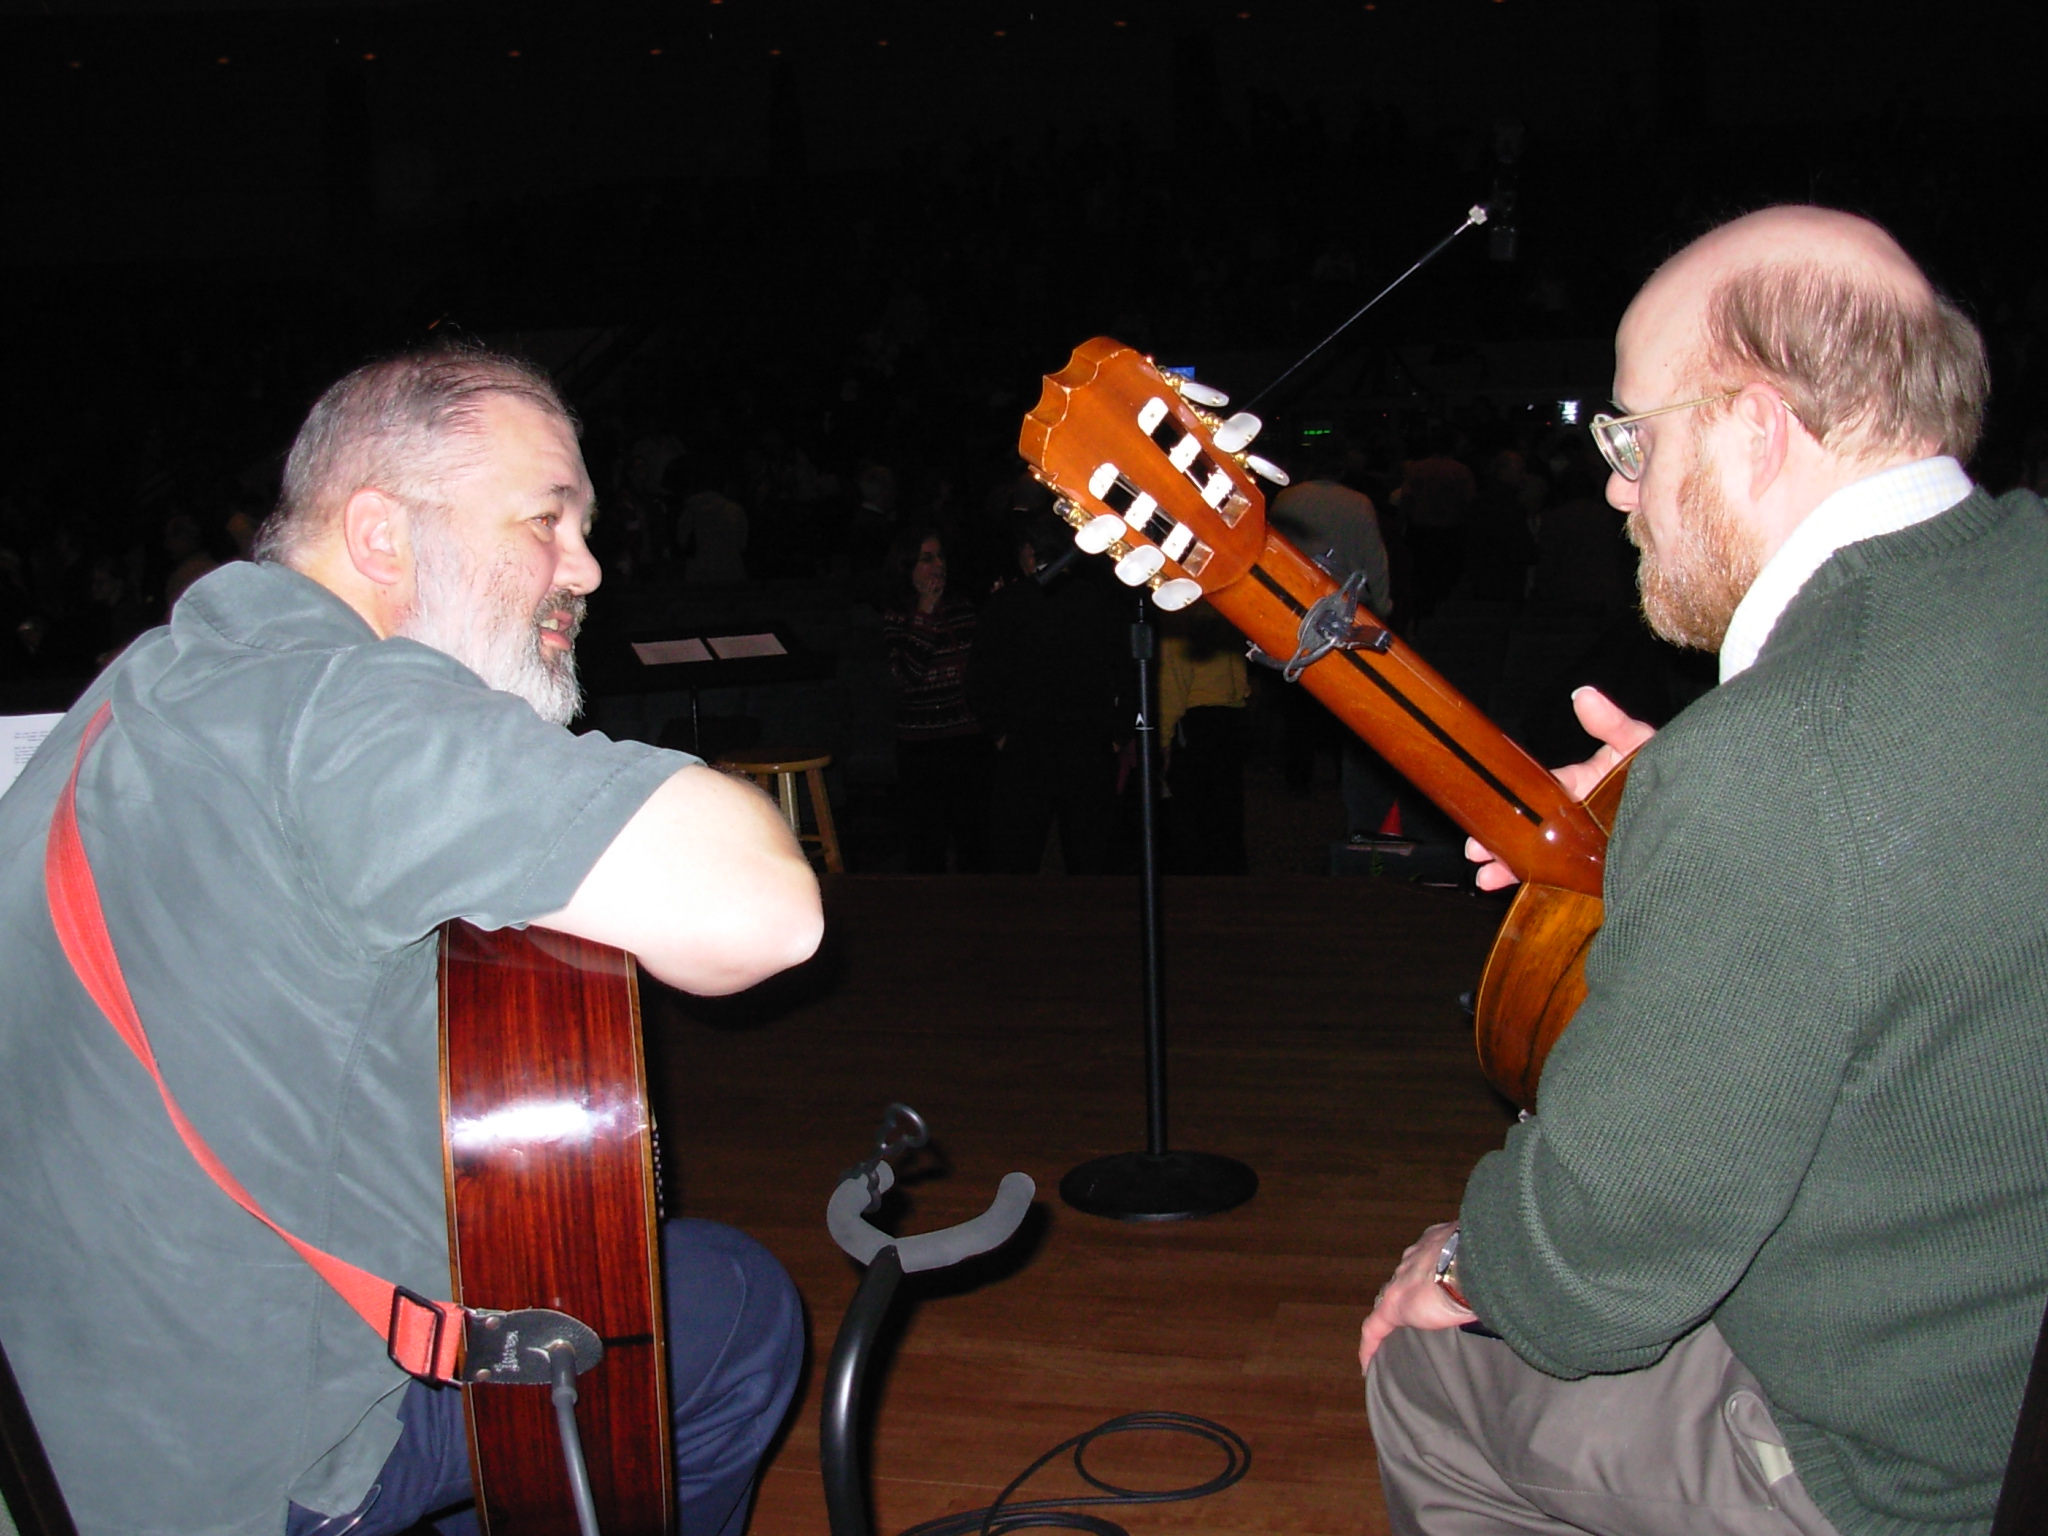 classical guitarists geoff twigg & len zwally
I had the best seat in the house
